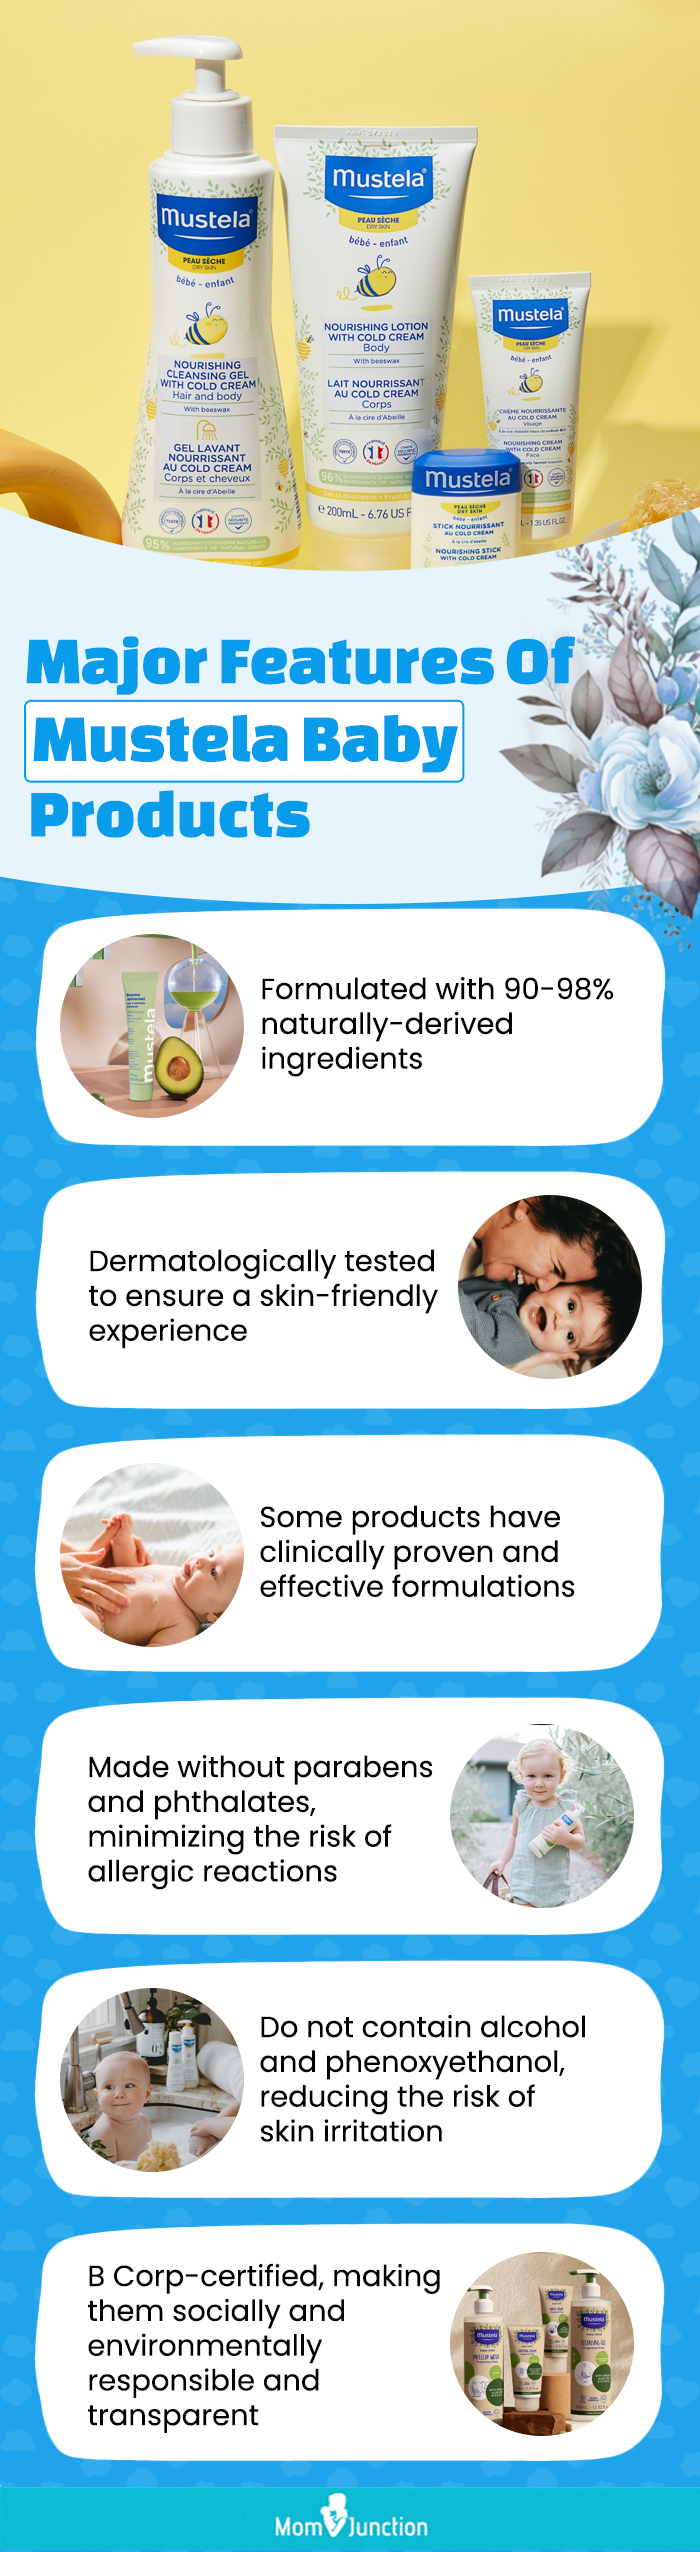 Major Features Of Mustela Baby Products (infographic)